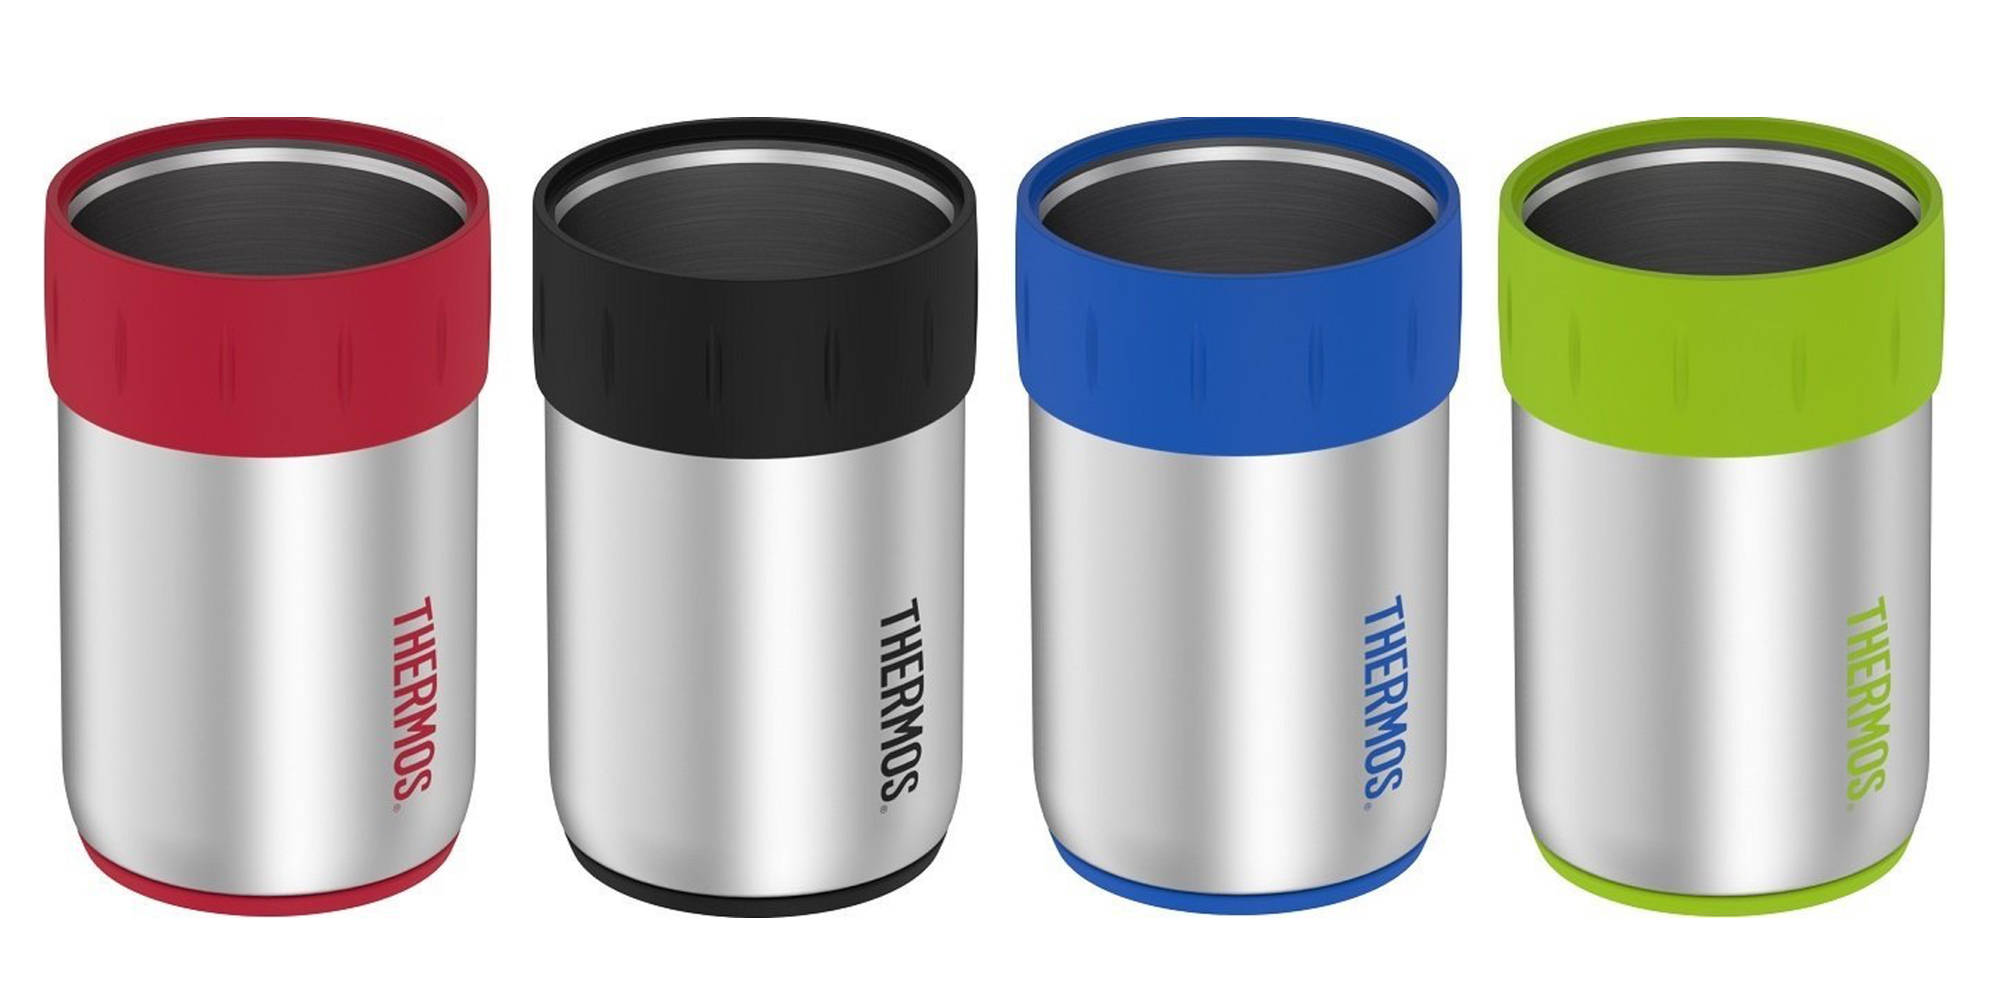 Thermos Vacuum Insulated 12-Oz Can Holder 4-pack for $24 (Reg. $30)